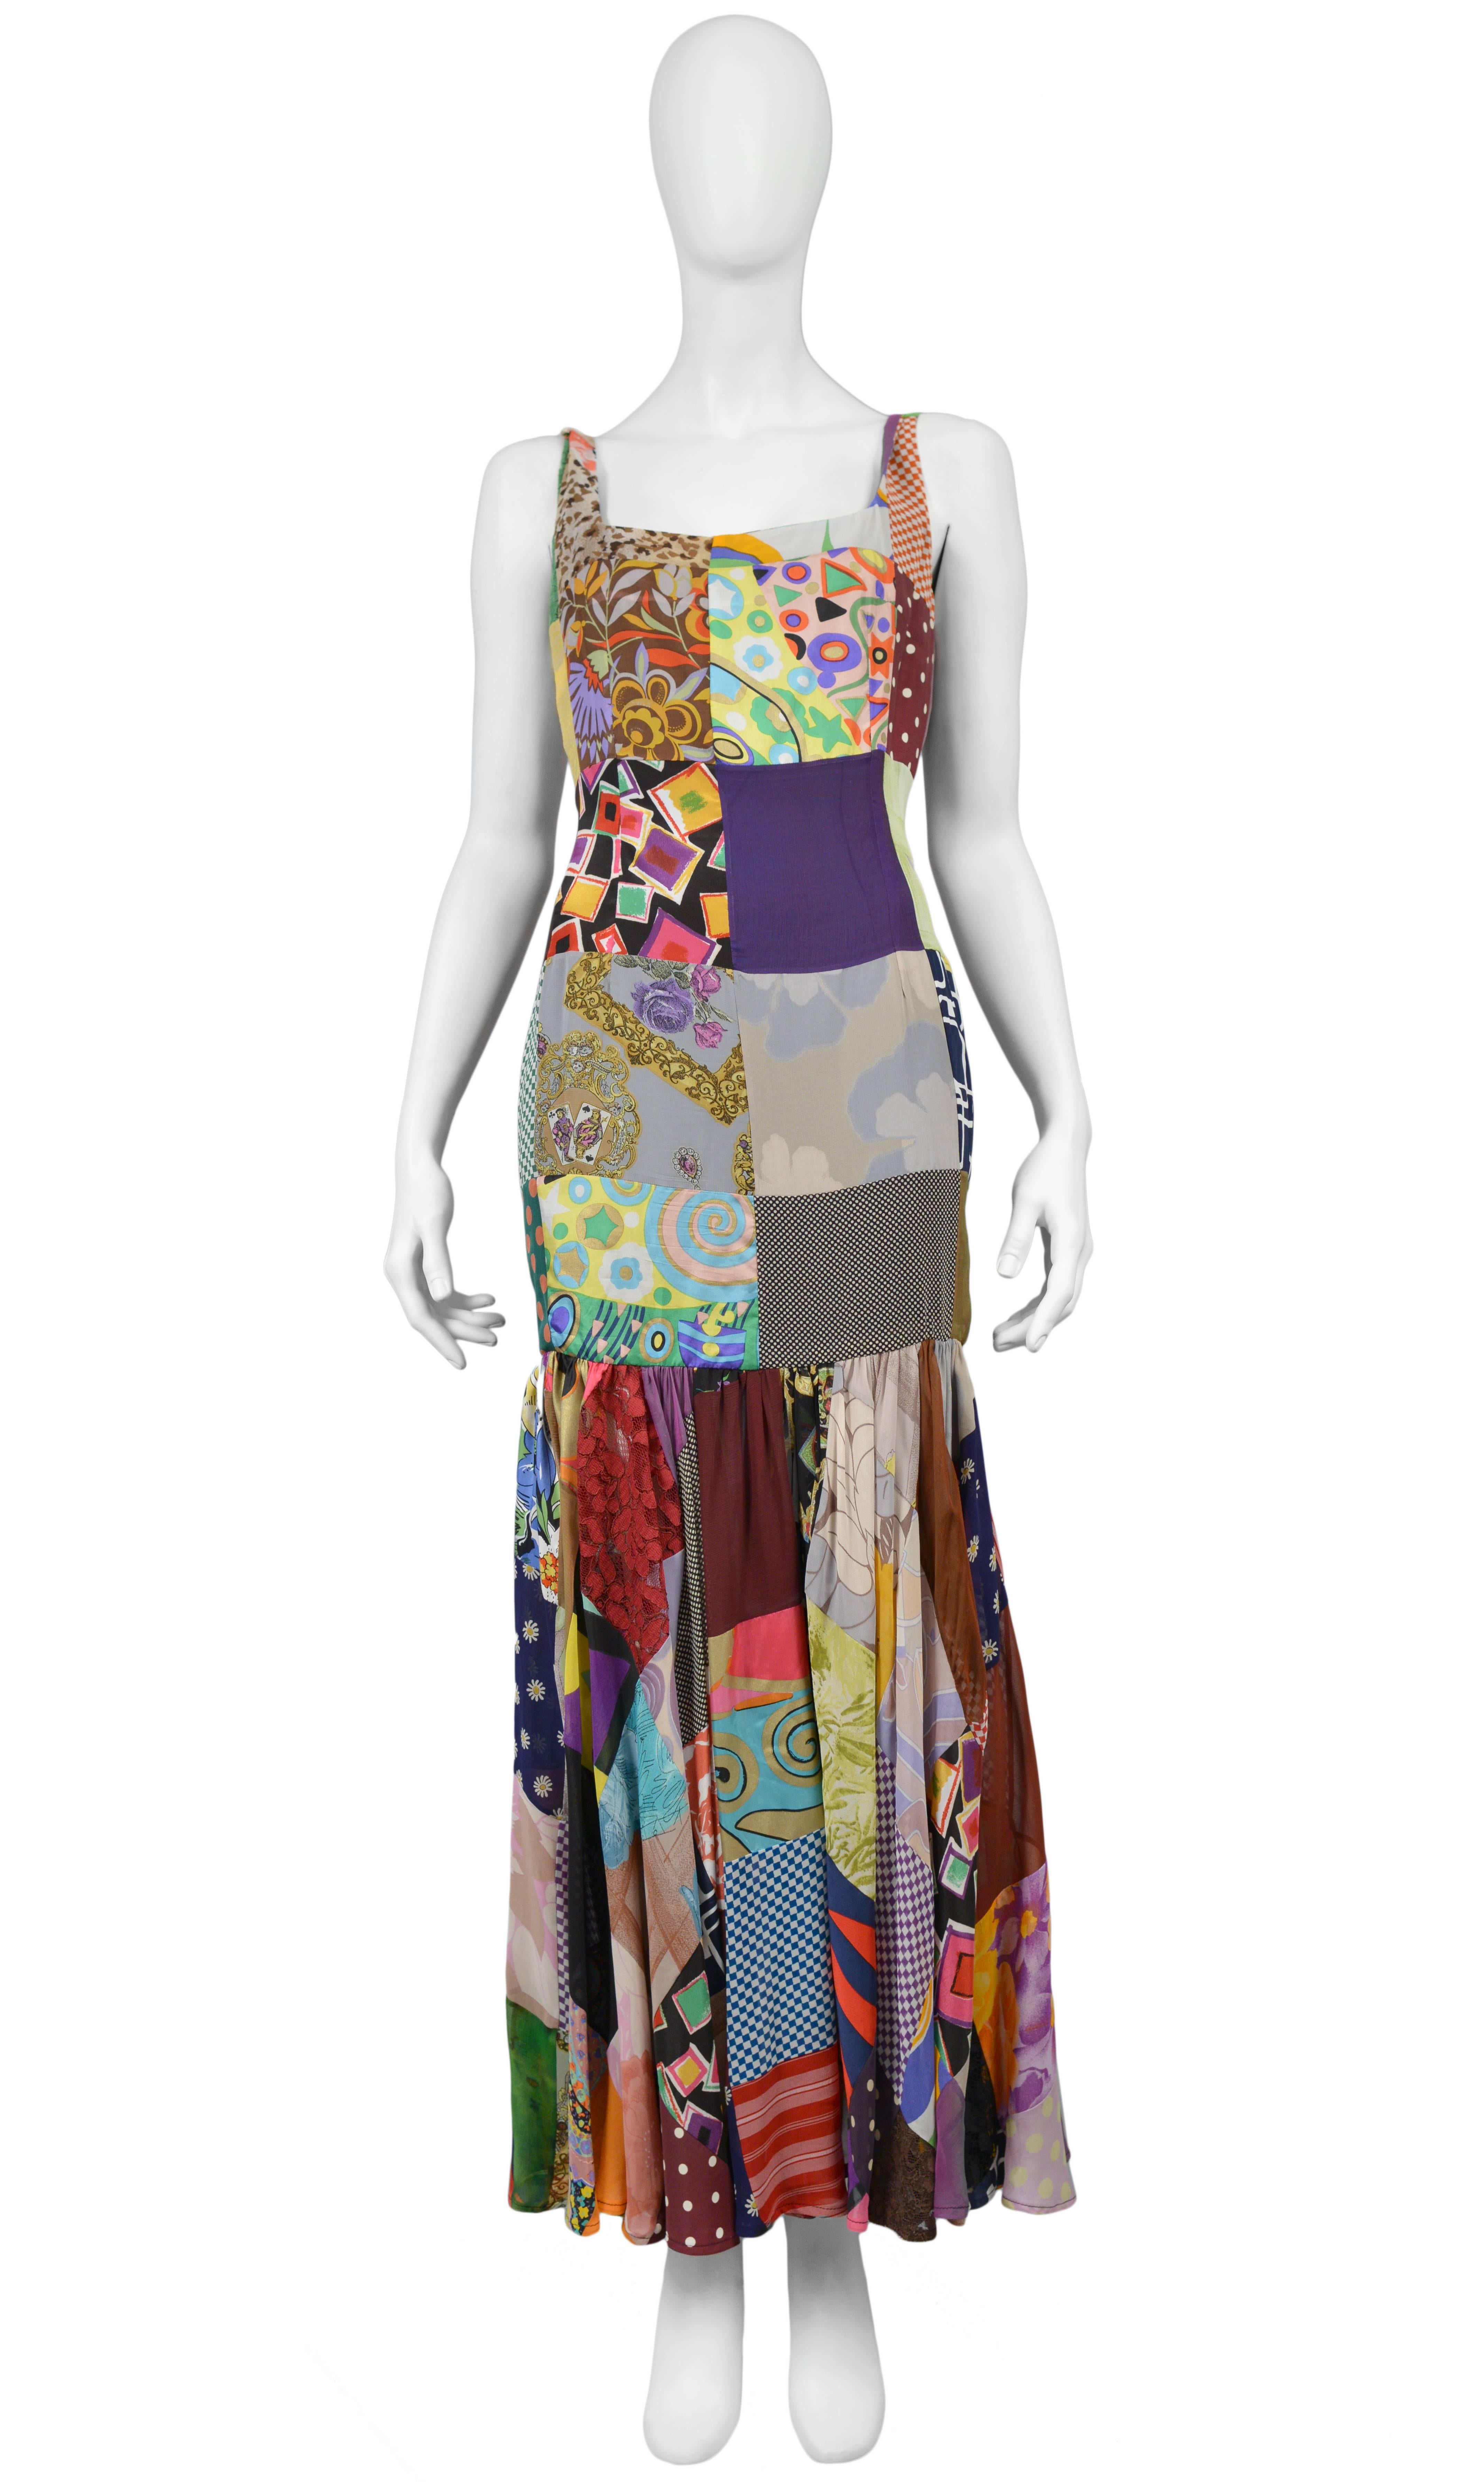 Vintage Dolce & Gabbana sleeveless maxi gown featuring a flounce at the hem and multicolor printed fabrics sewn together in a patchwork style. Circa 1993.
Please inquire for additional images.